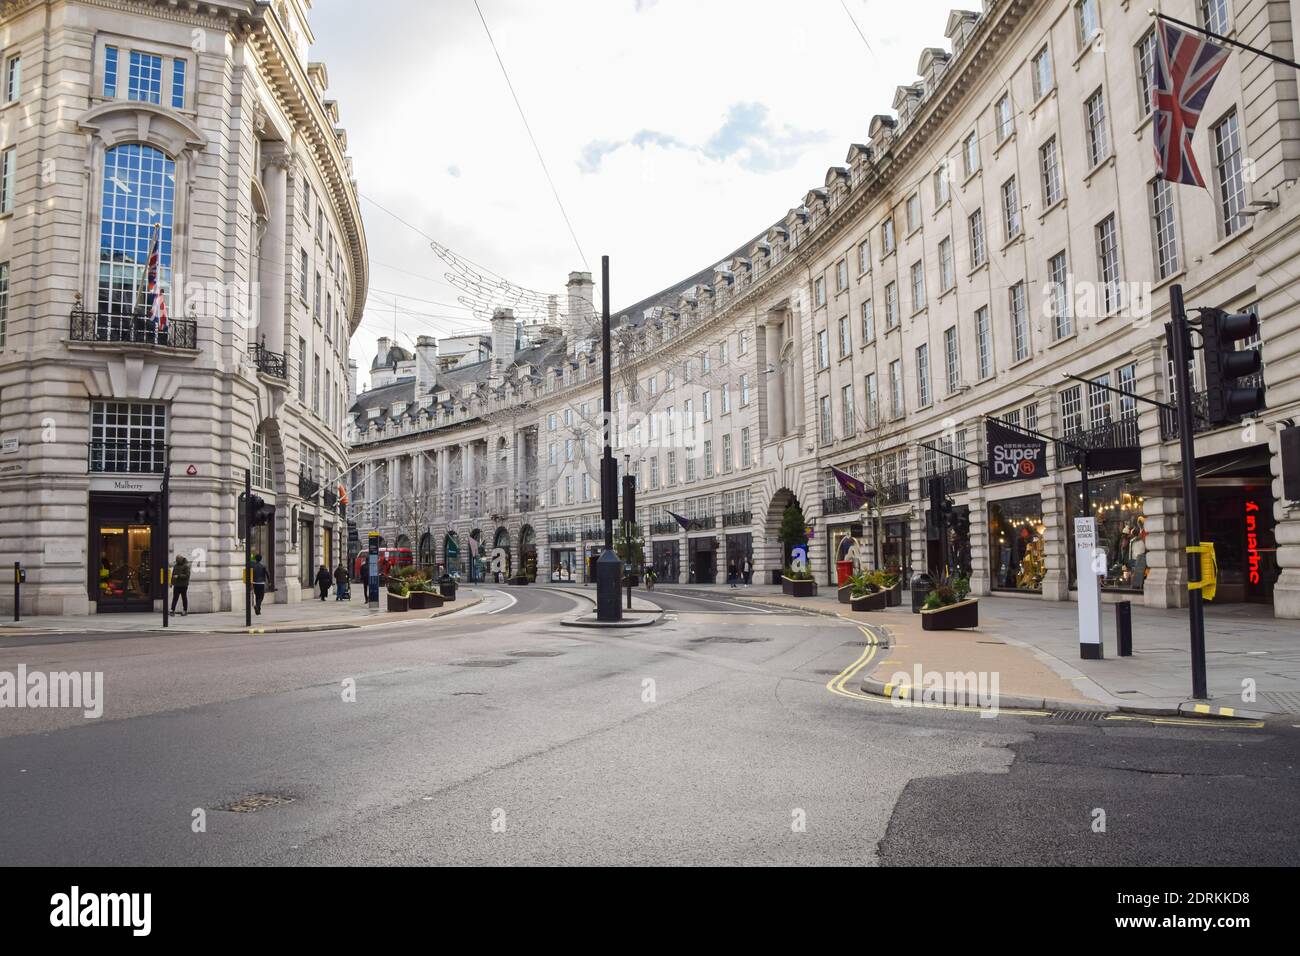 A view of a deserted Regent Street, as shops and businesses close once again. London has imposed even tougher restrictions as cases surge and a new strain of COVID-19 emerges in the capital and the South East of England. Stock Photo